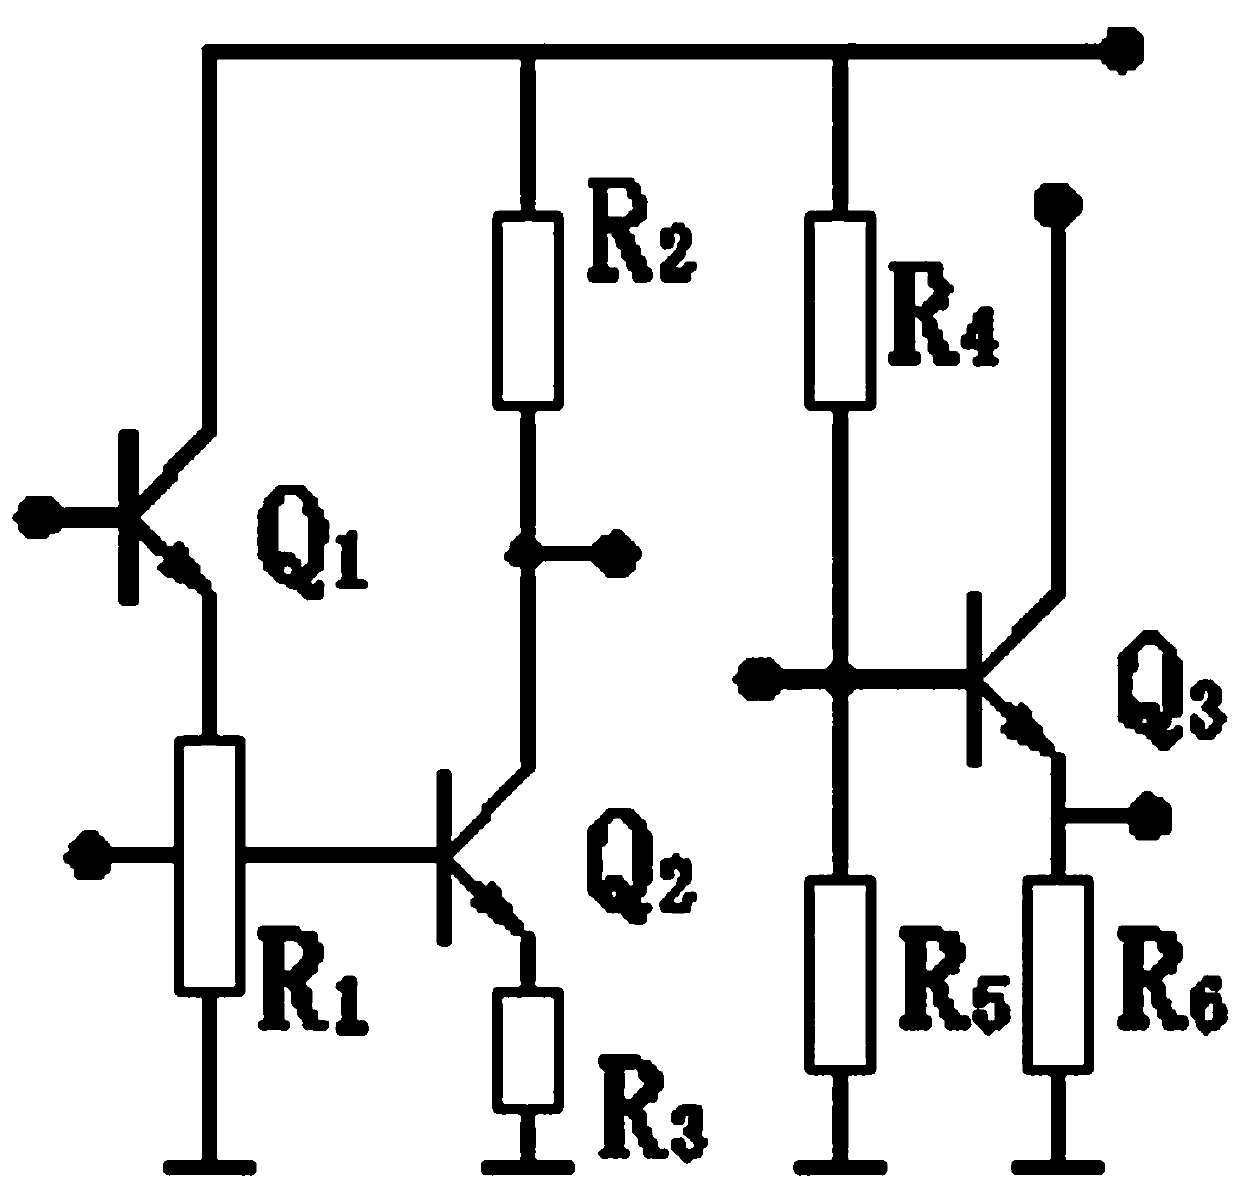 A dedicated integrated circuit for crystal oscillator